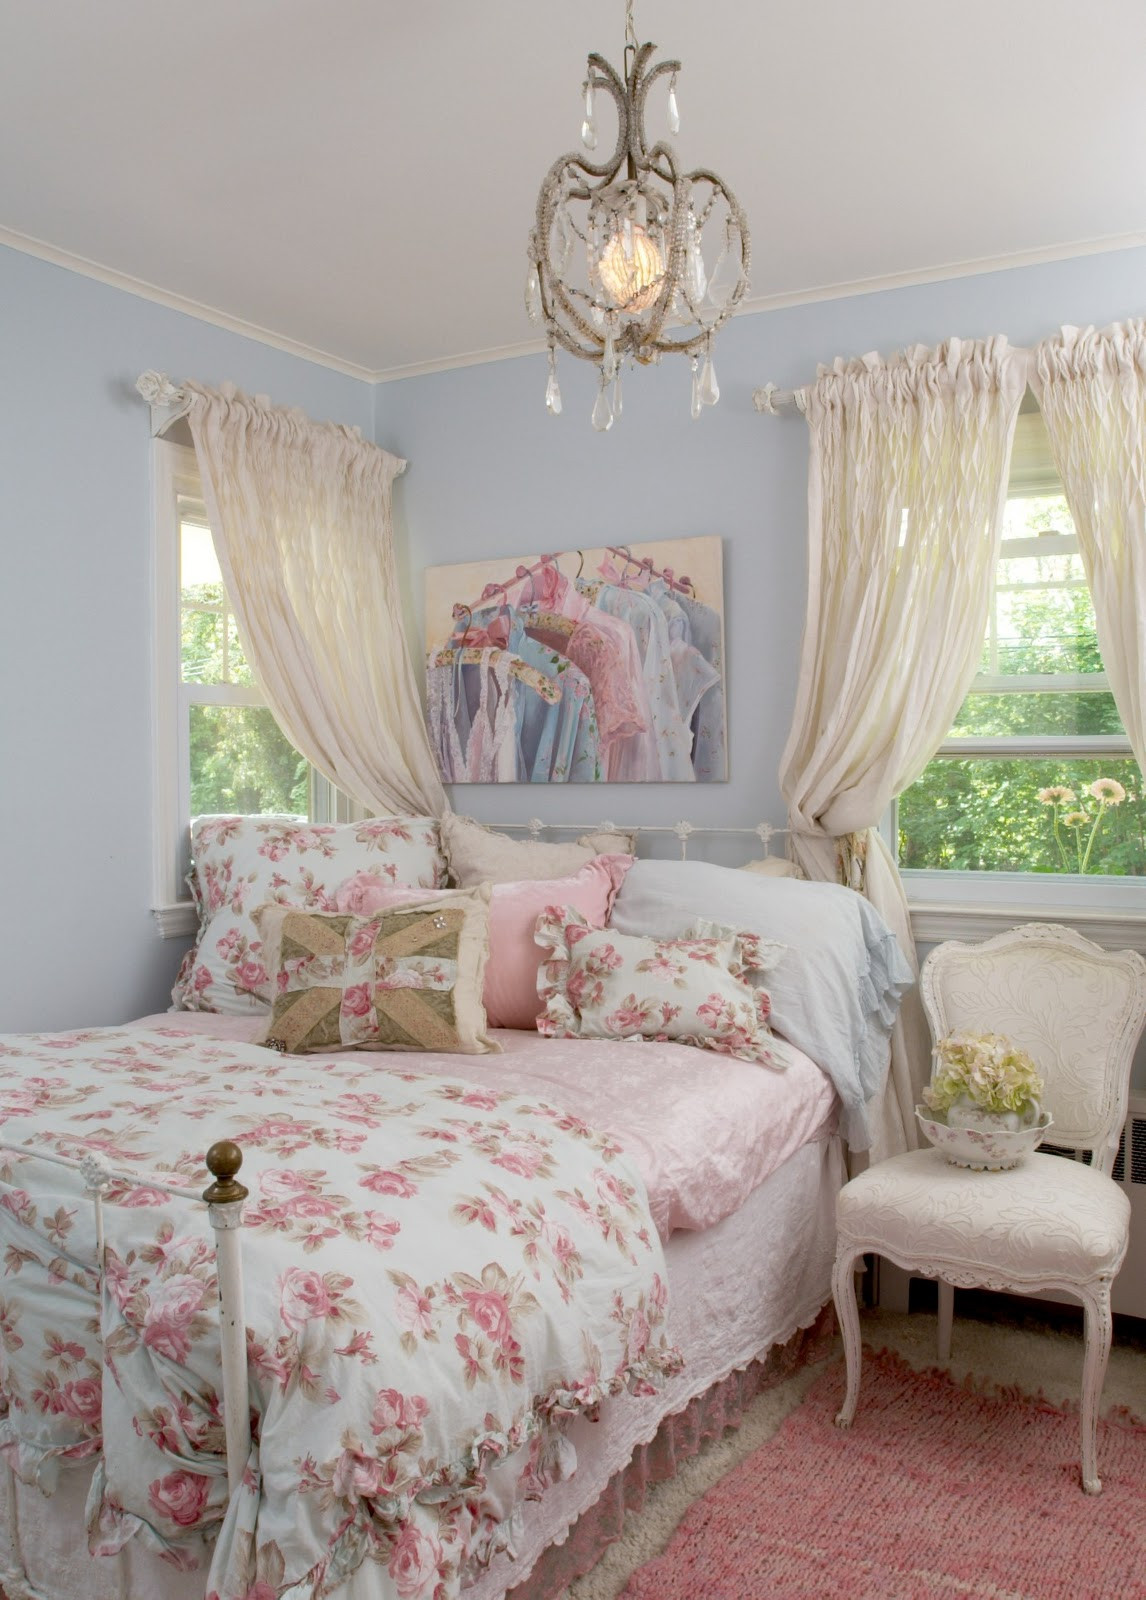 Shabby Chic Bedroom Pictures
 Maison Decor My Shabby Bedroom Makeover Plan